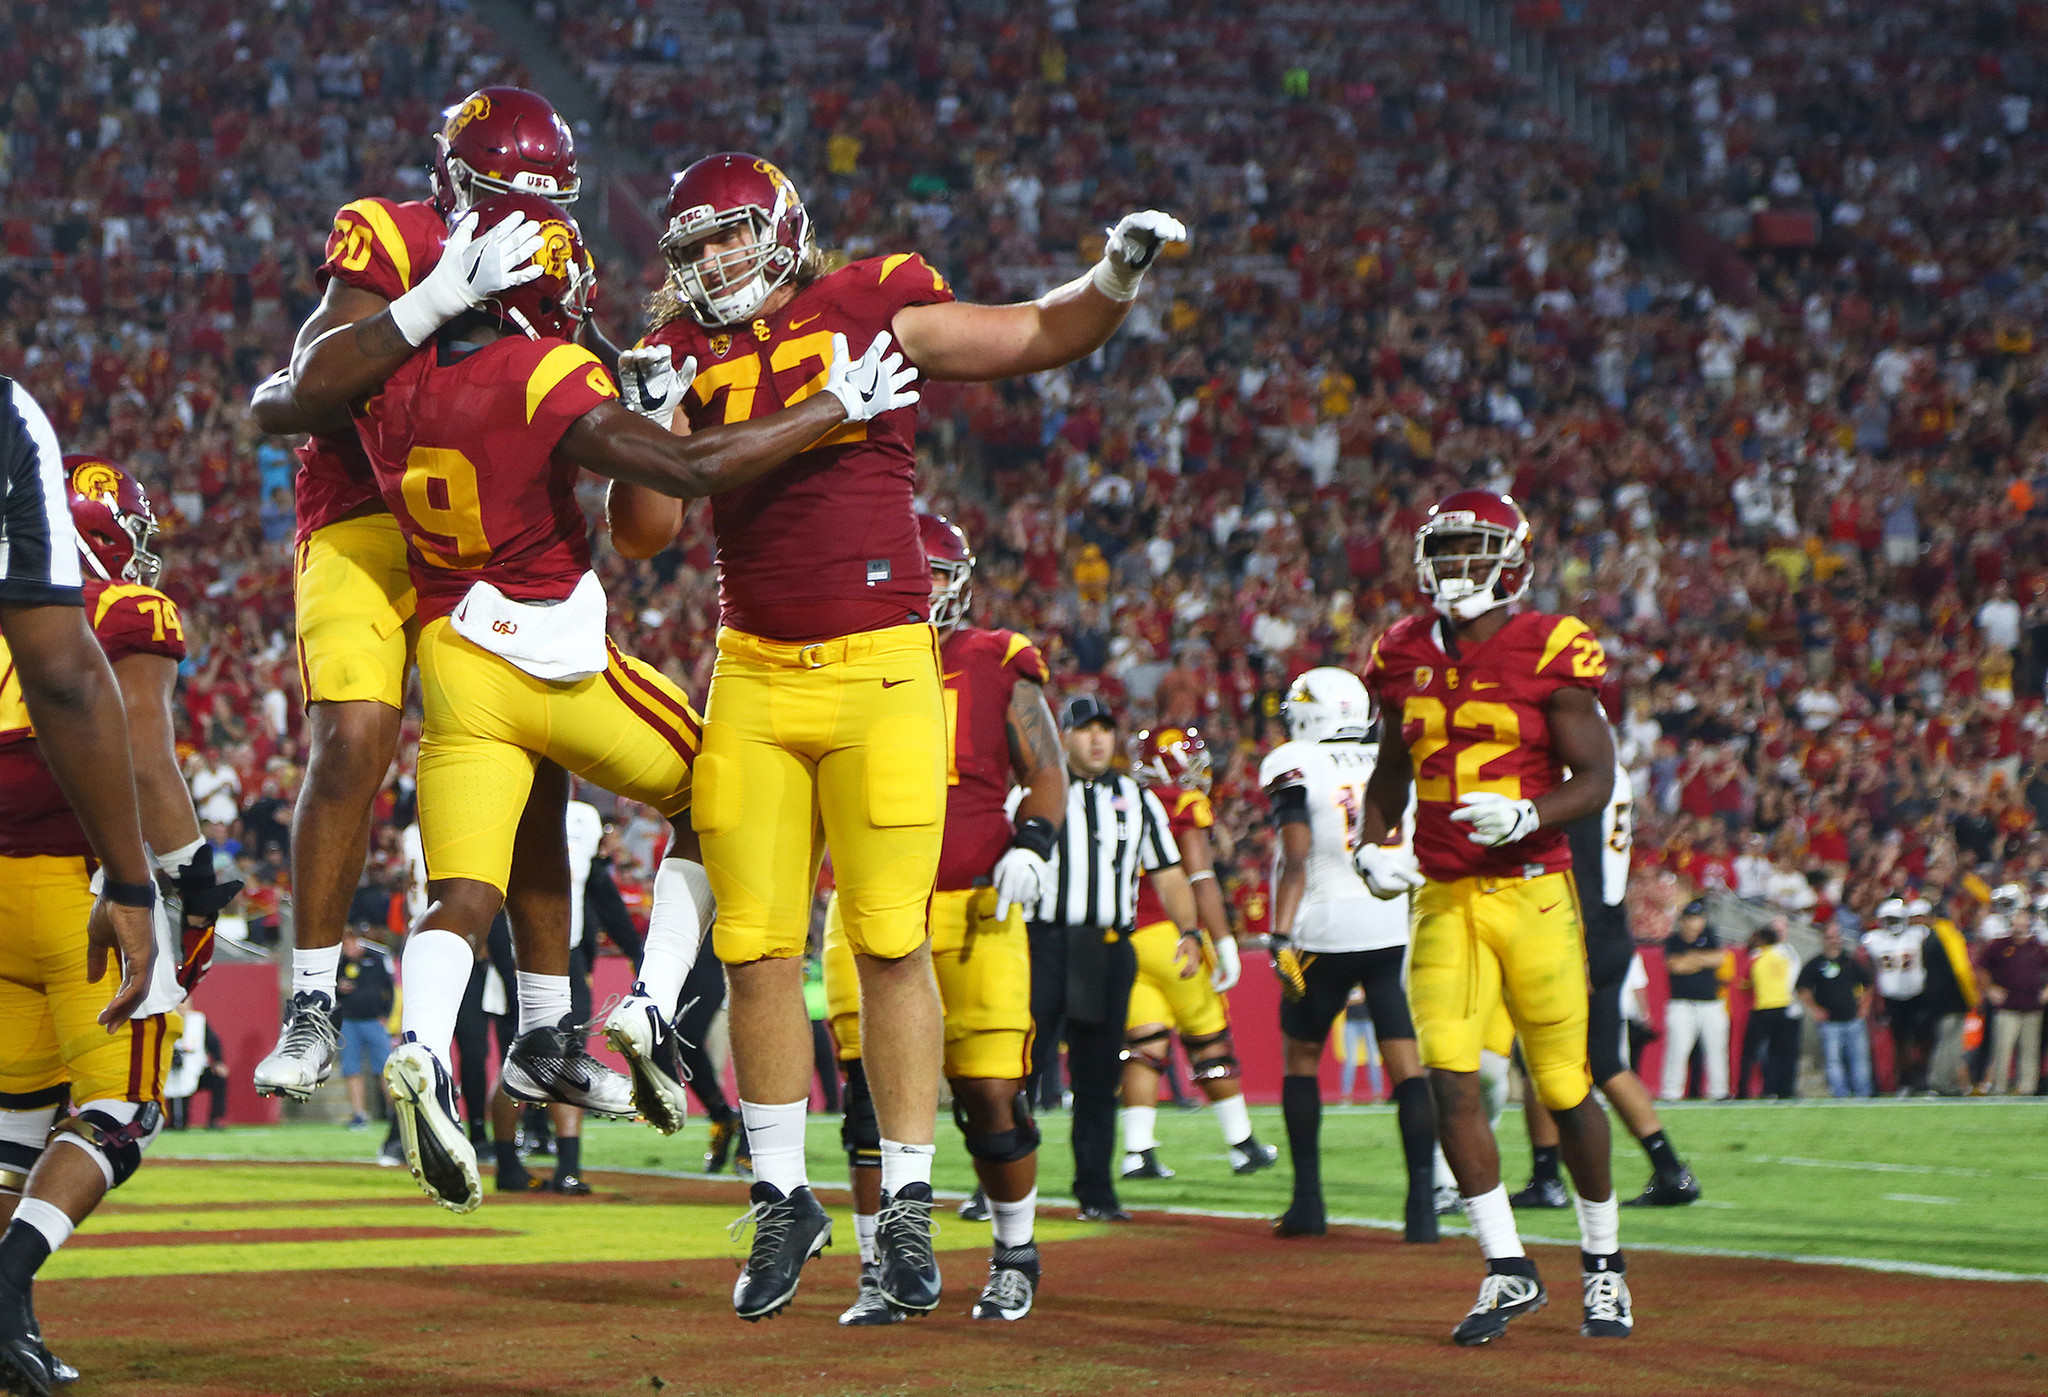 Youth has not been served for USC this season - LA Times